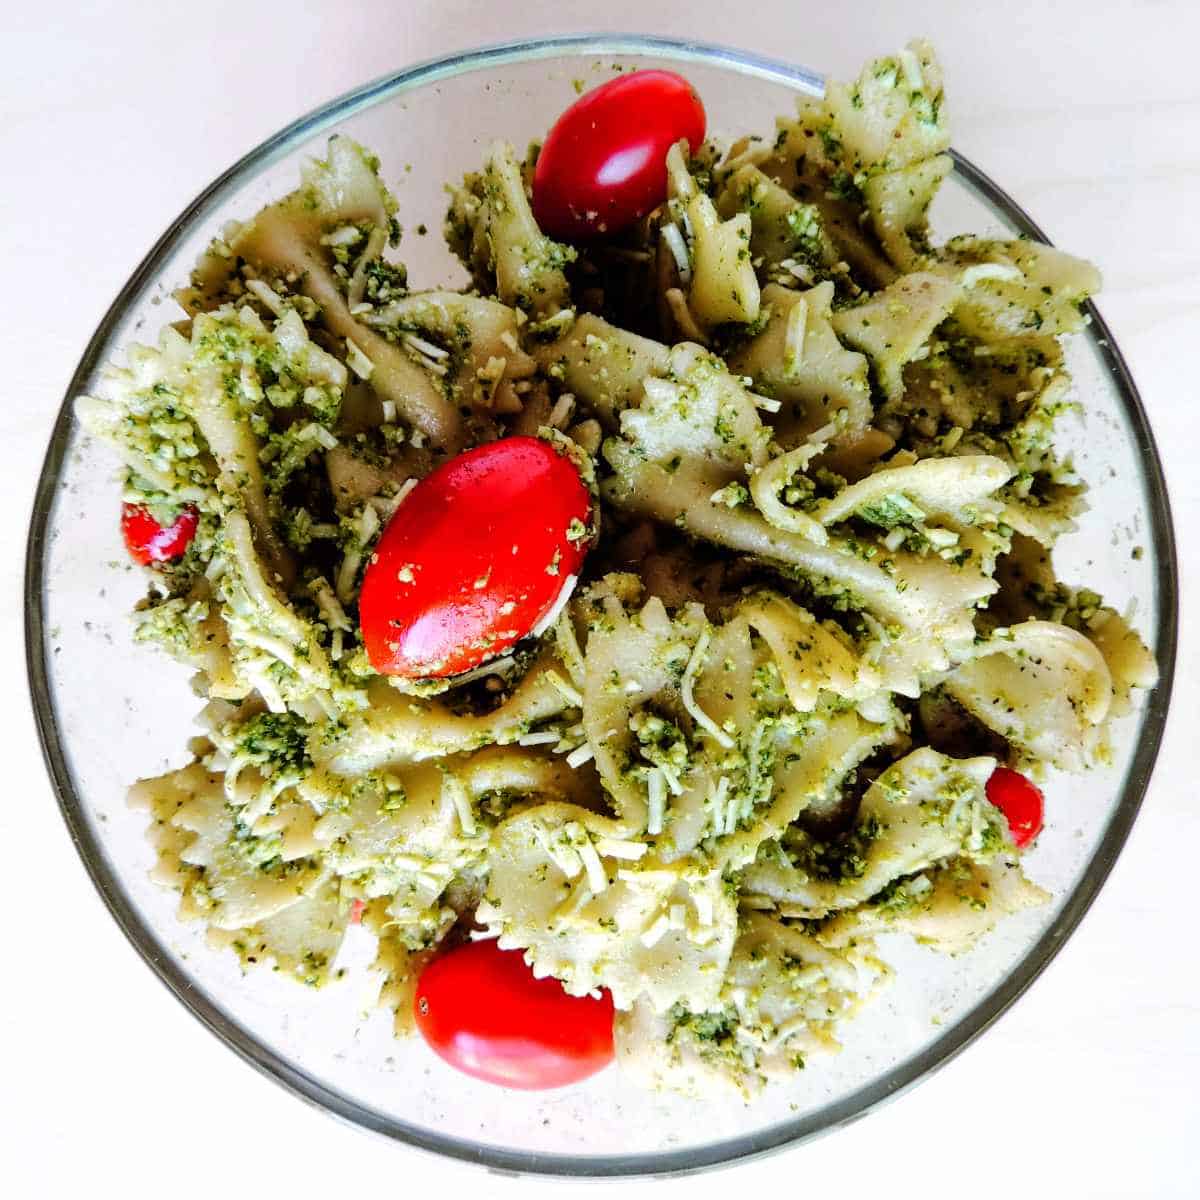 tossed pasta, tomatoes, and pesto in a bowl.